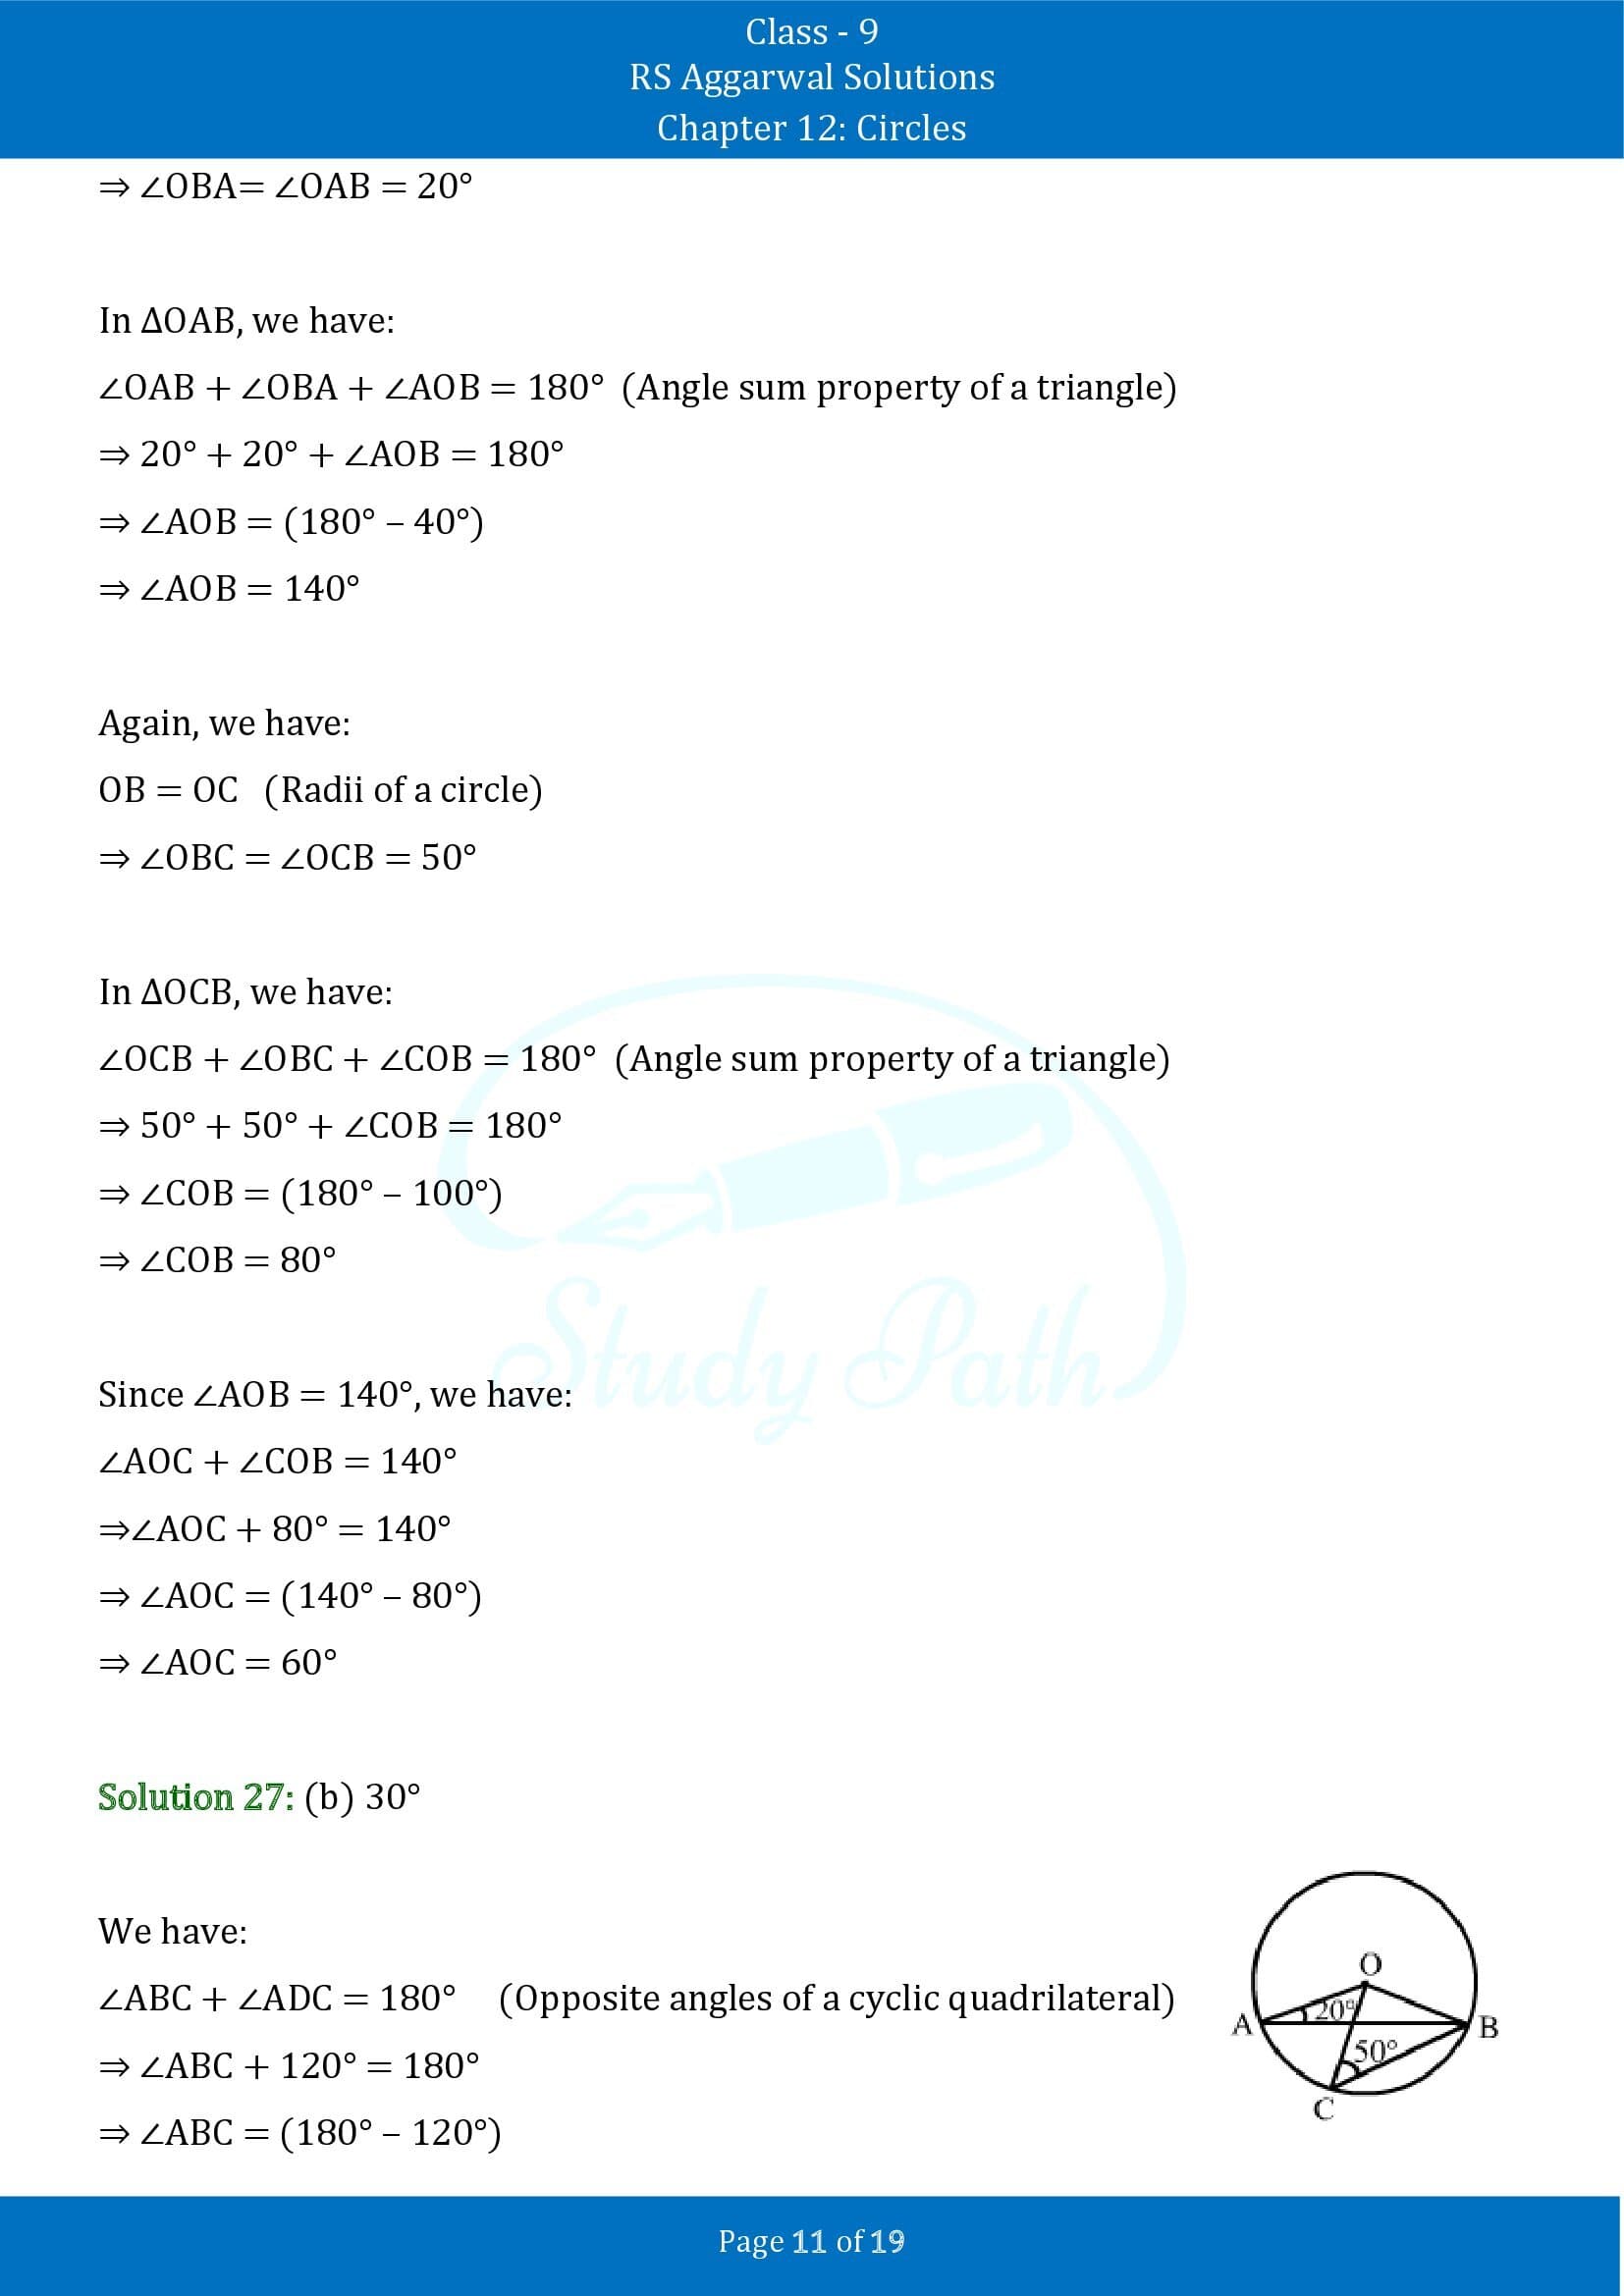 RS Aggarwal Solutions Class 9 Chapter 12 Circles Multiple Choice Questions MCQs 00011